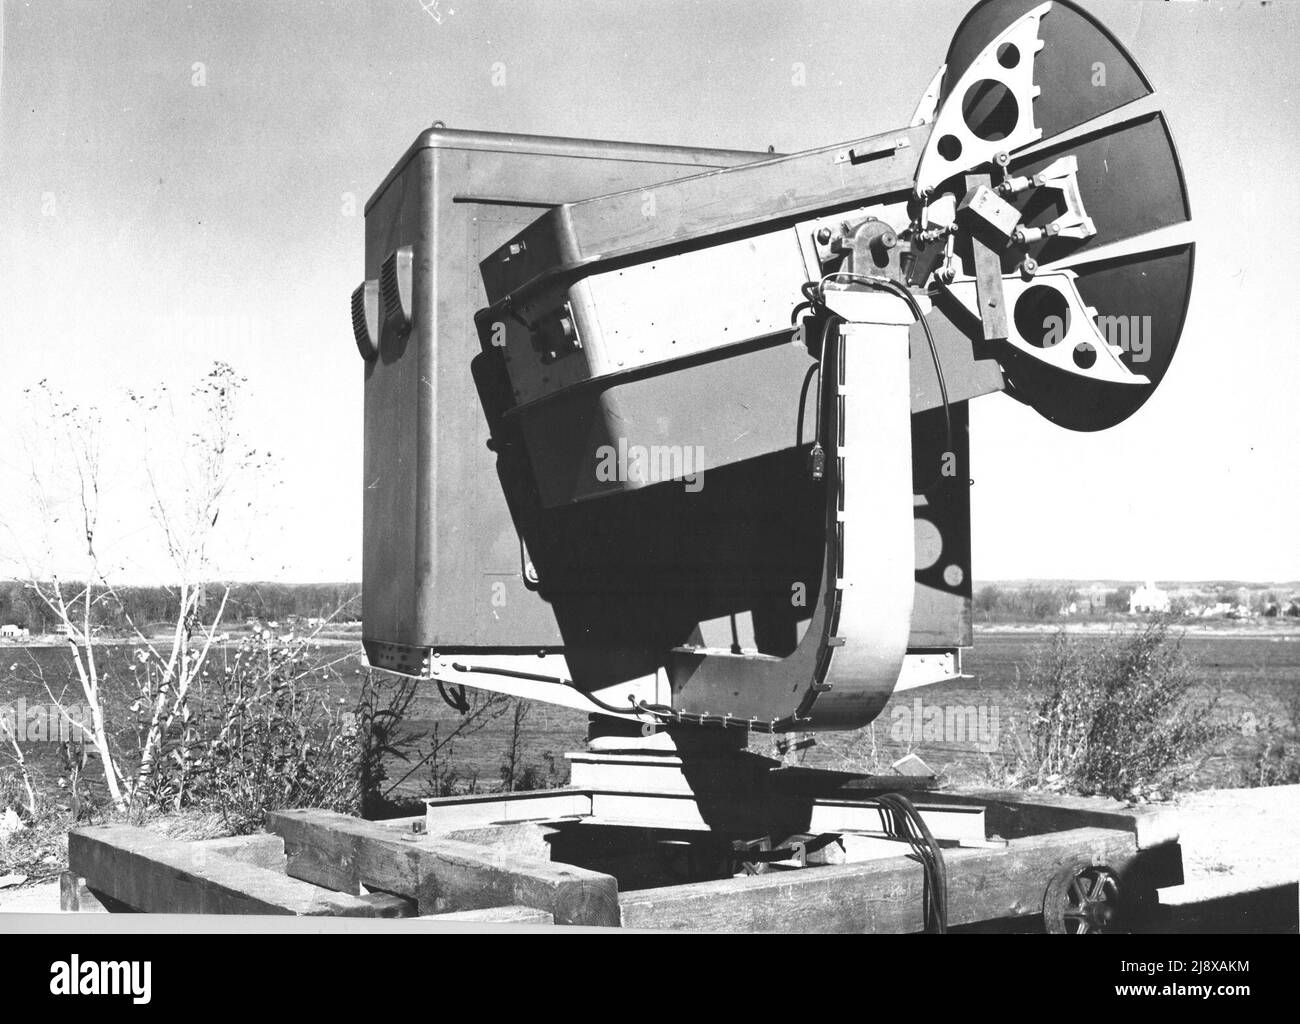 The National Research Council of Canada developed this unique version of a Searchlight Control Radar between 1942 and March 1944. It did not guide a searchlight directly like its British counterparts. Instead, an operator in the cabin could verify the target the radar was tracking through a window (not visible here) and the signals would be sent to a searchlight to aim it. During testing, it was found that the system could track so rapidly that the operators had motion sickness and development was abandoned.  ca.   1943 - 1944 Stock Photo